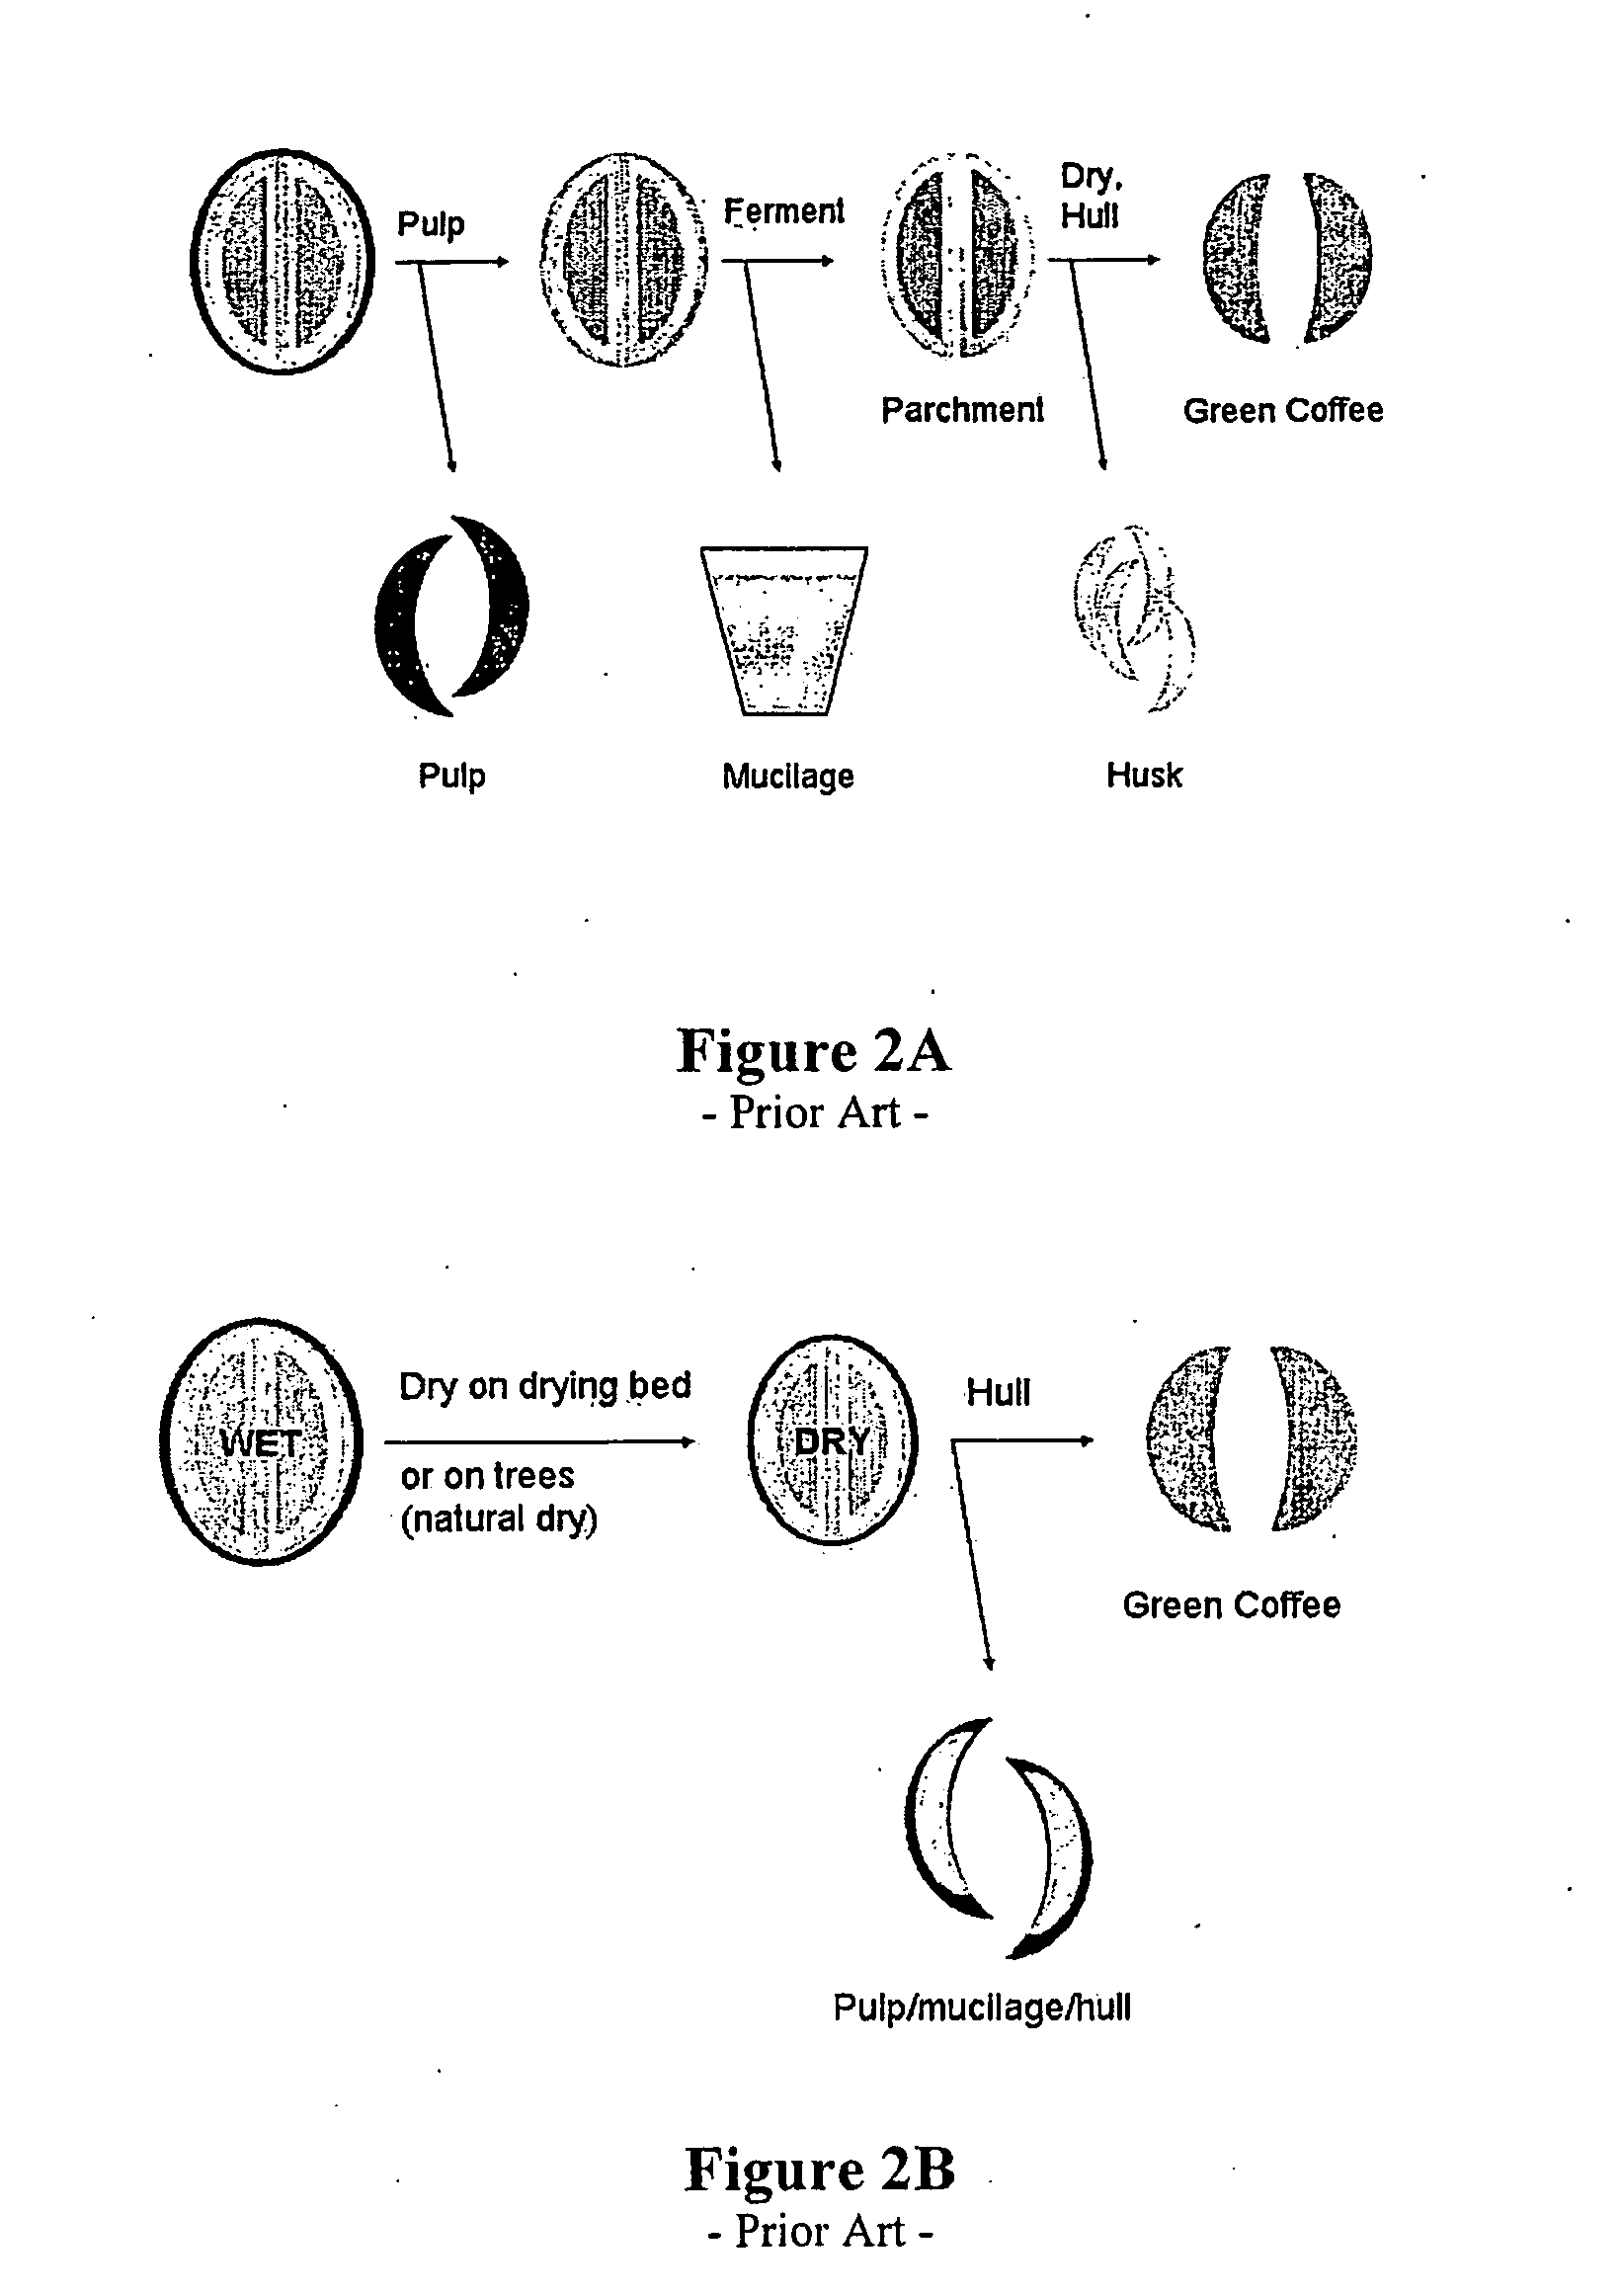 Methods for coffee cherry products